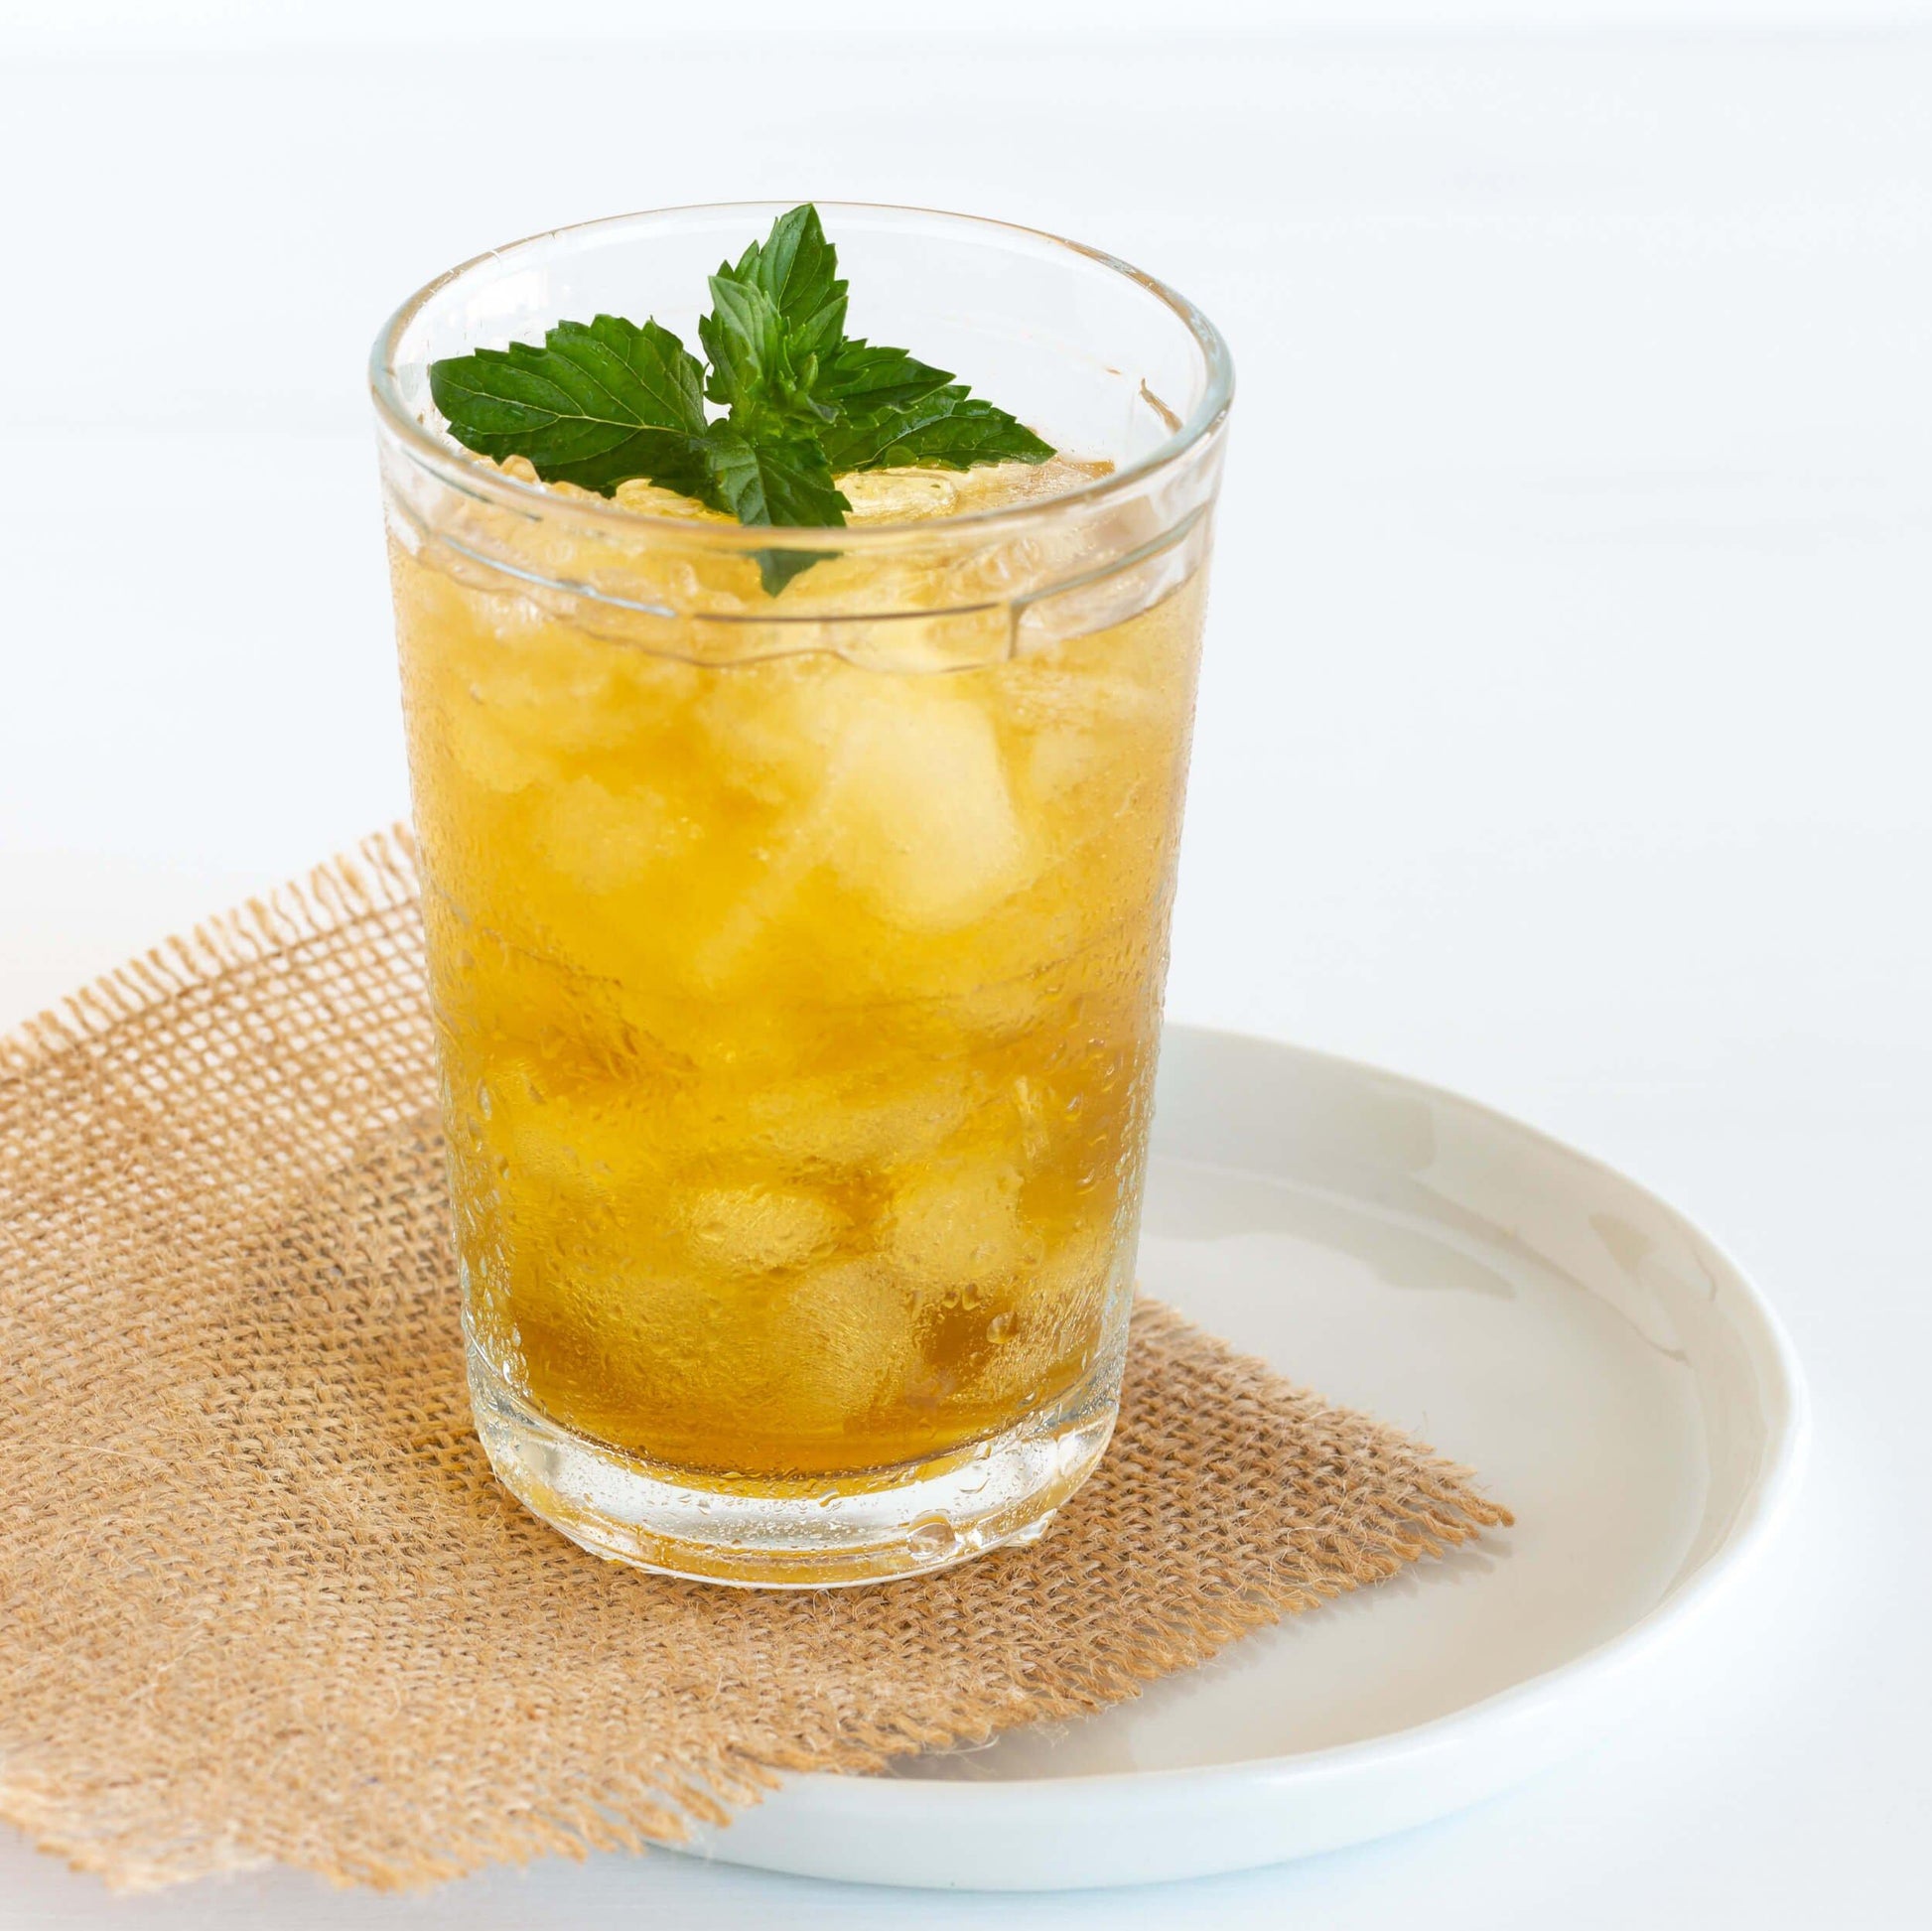 Peppermint Organic Herbal Tea shown as iced tea in a clear glass with a sprig of mint leaves, displayed on a square of burlap on a white saucer